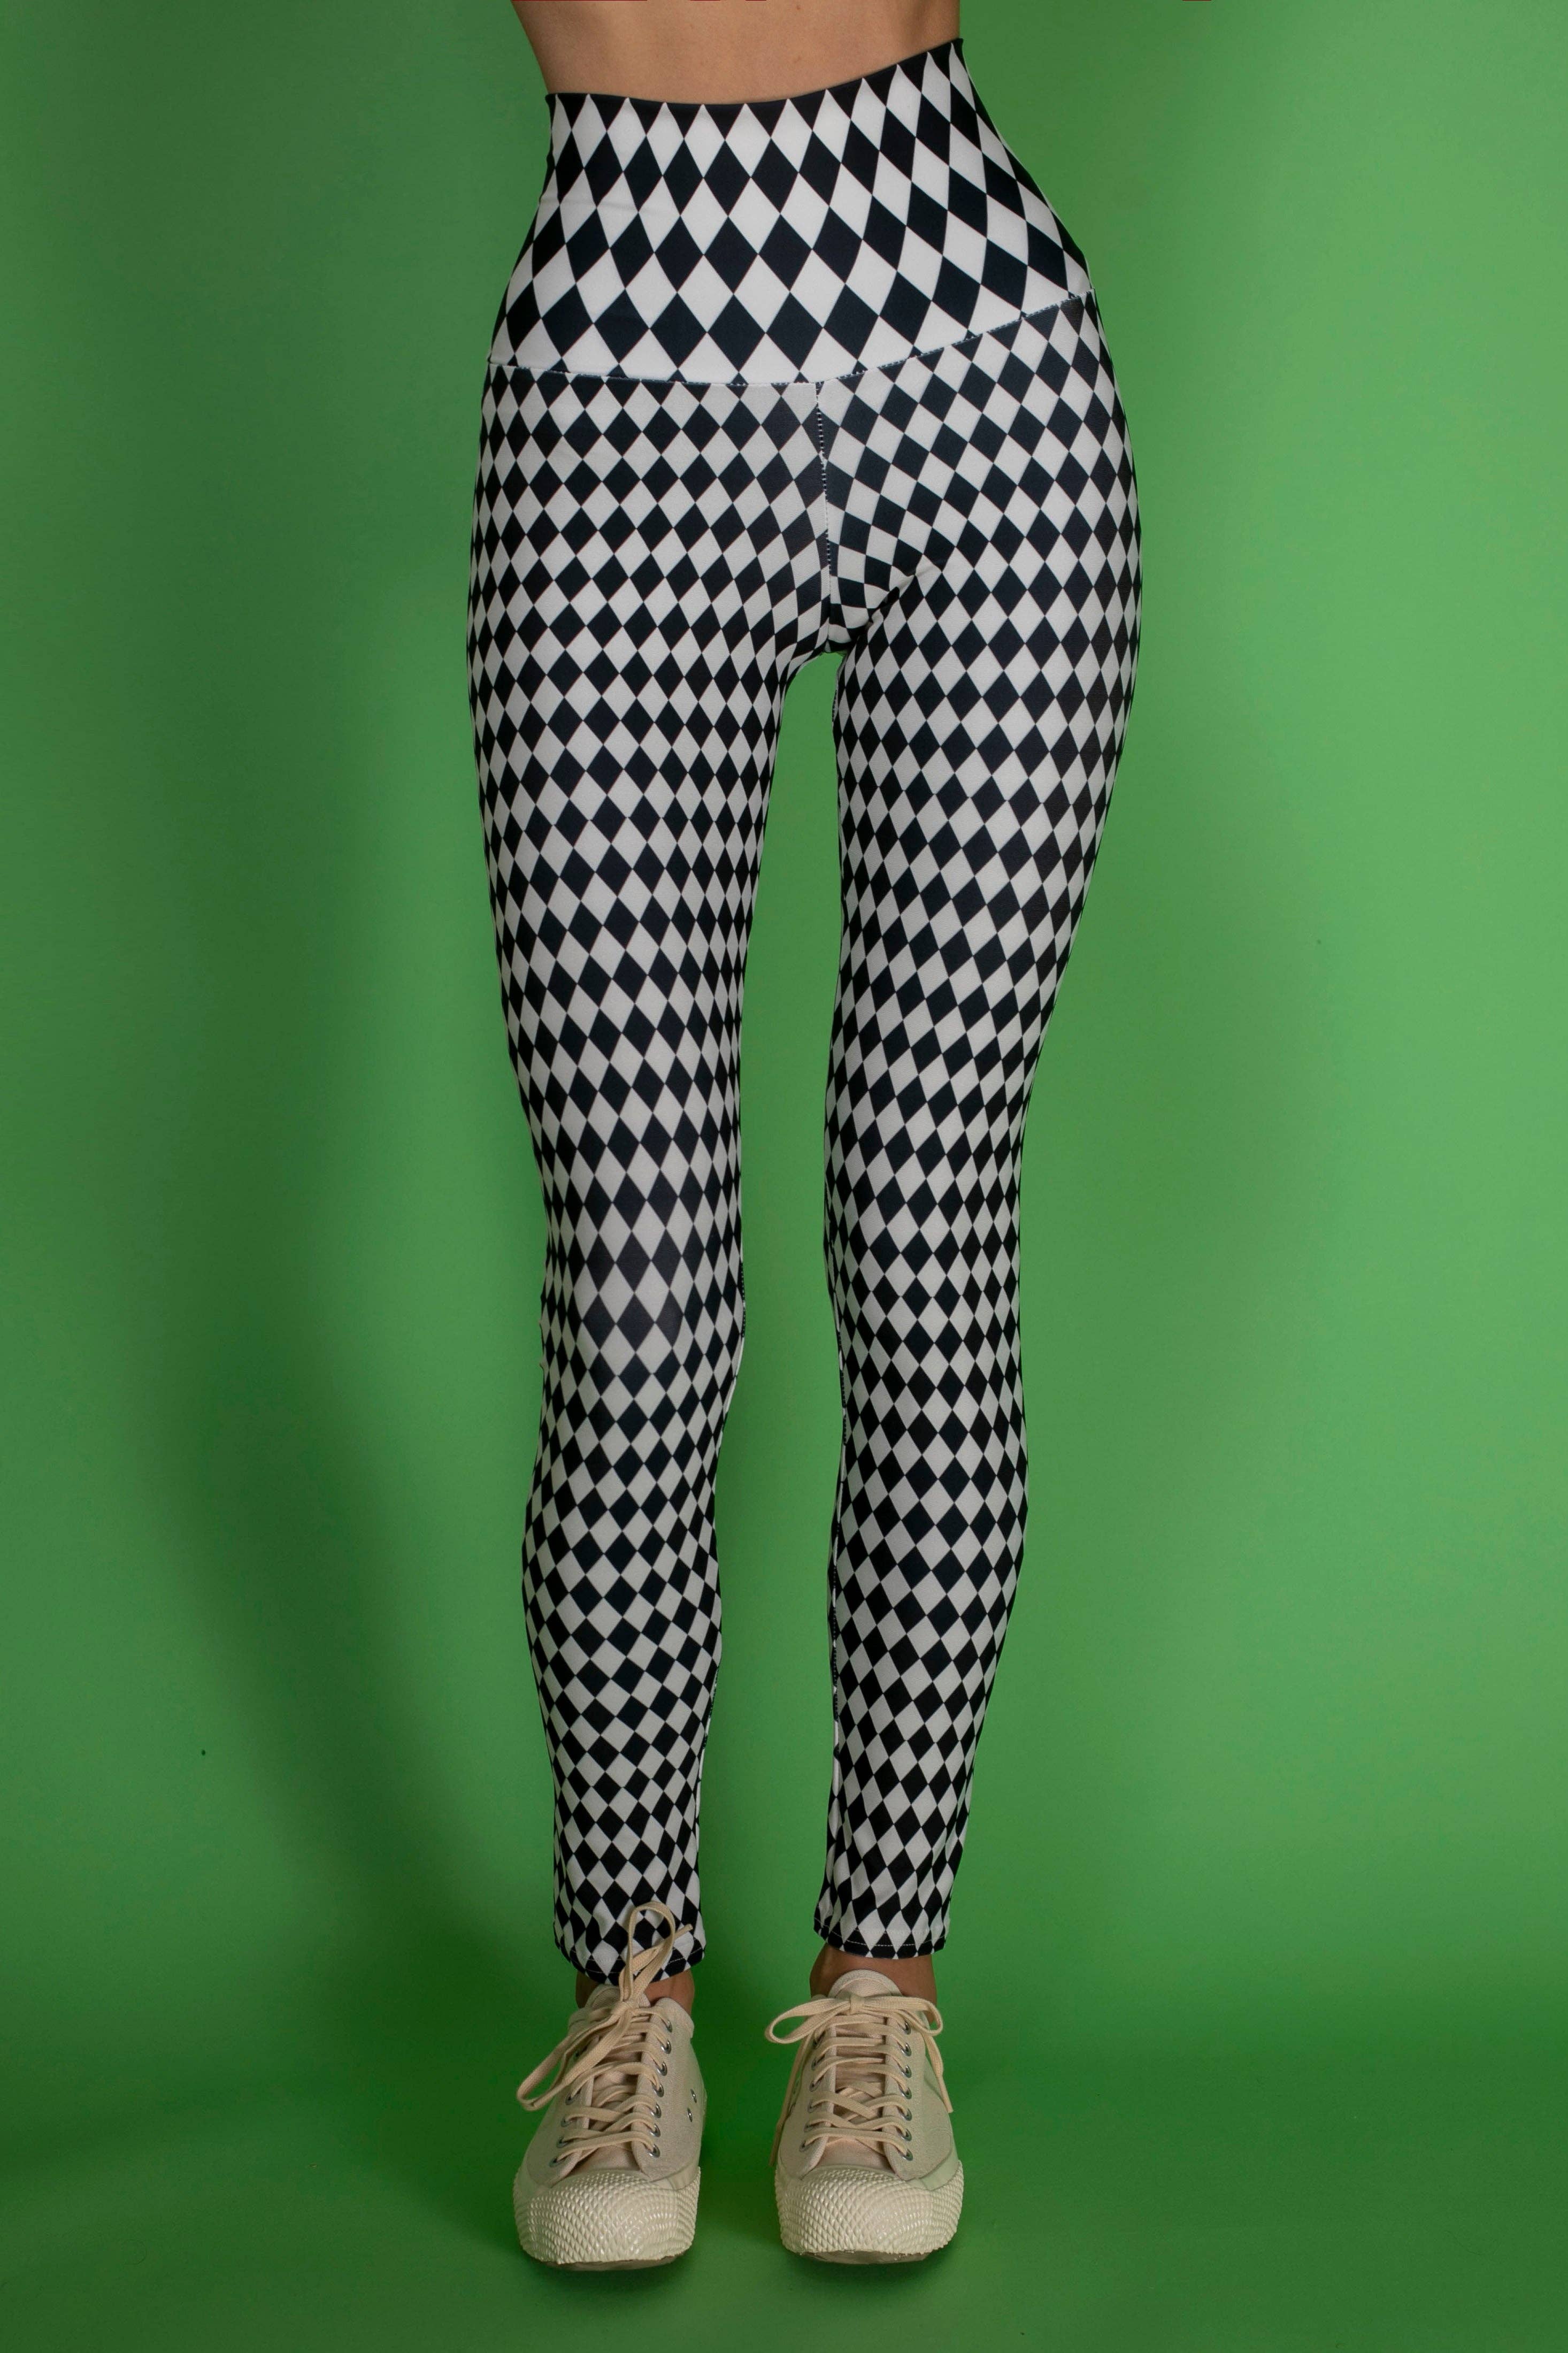 NUVULA QUEEN CHECKERED BLACK AND WHITE LEGGINGS – ISOF